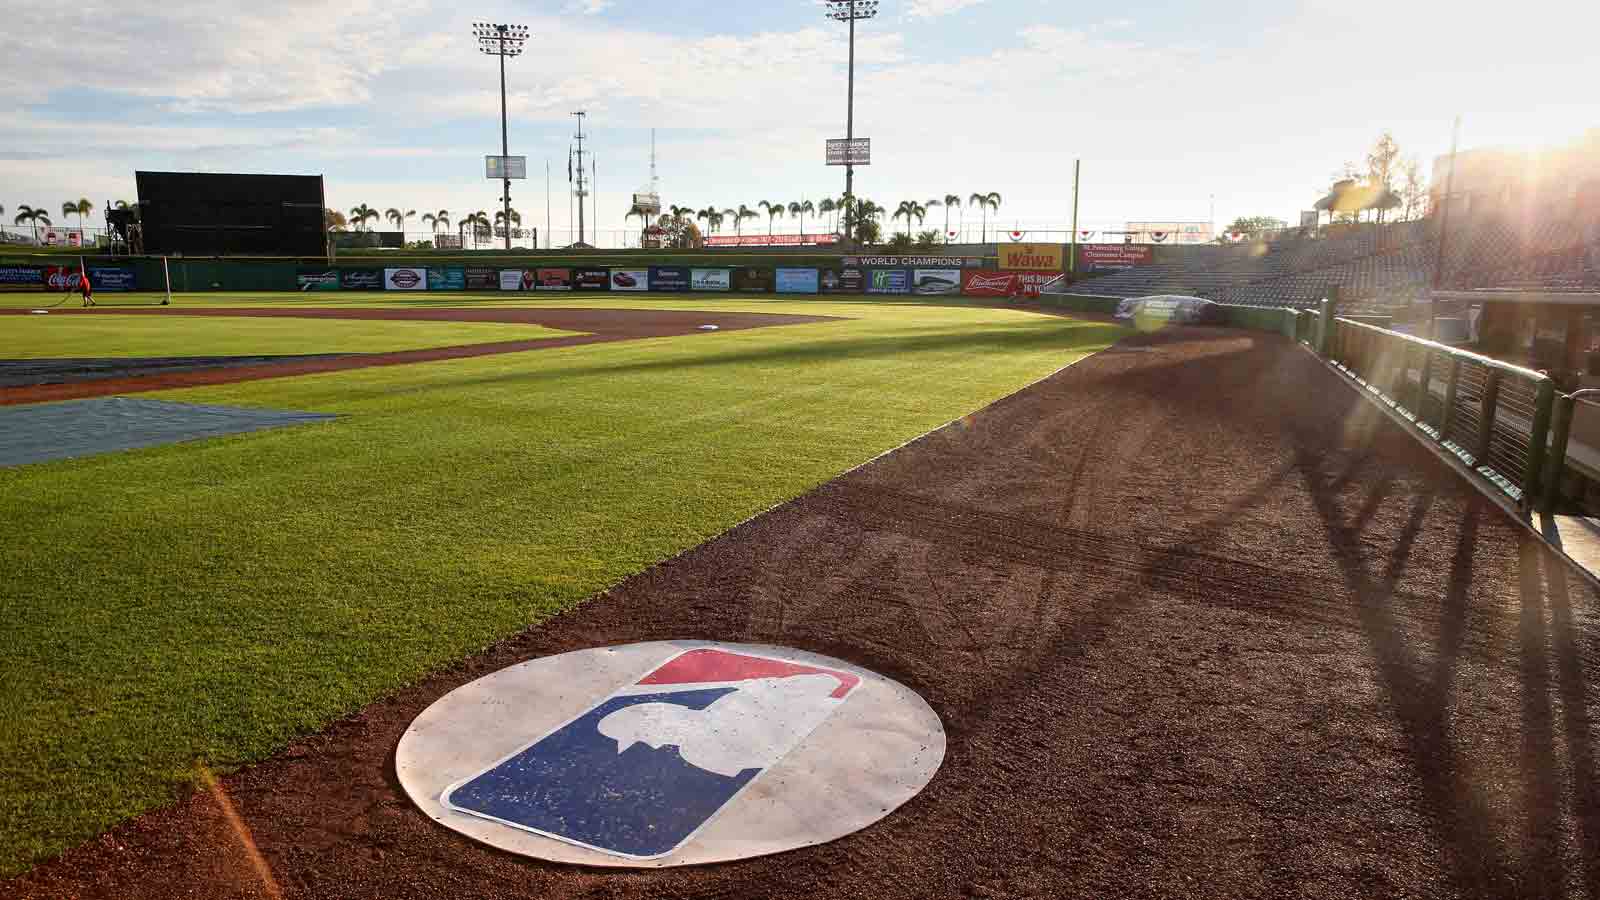 BayCare Ballpark: Phillies spring training stadium in Clearwater